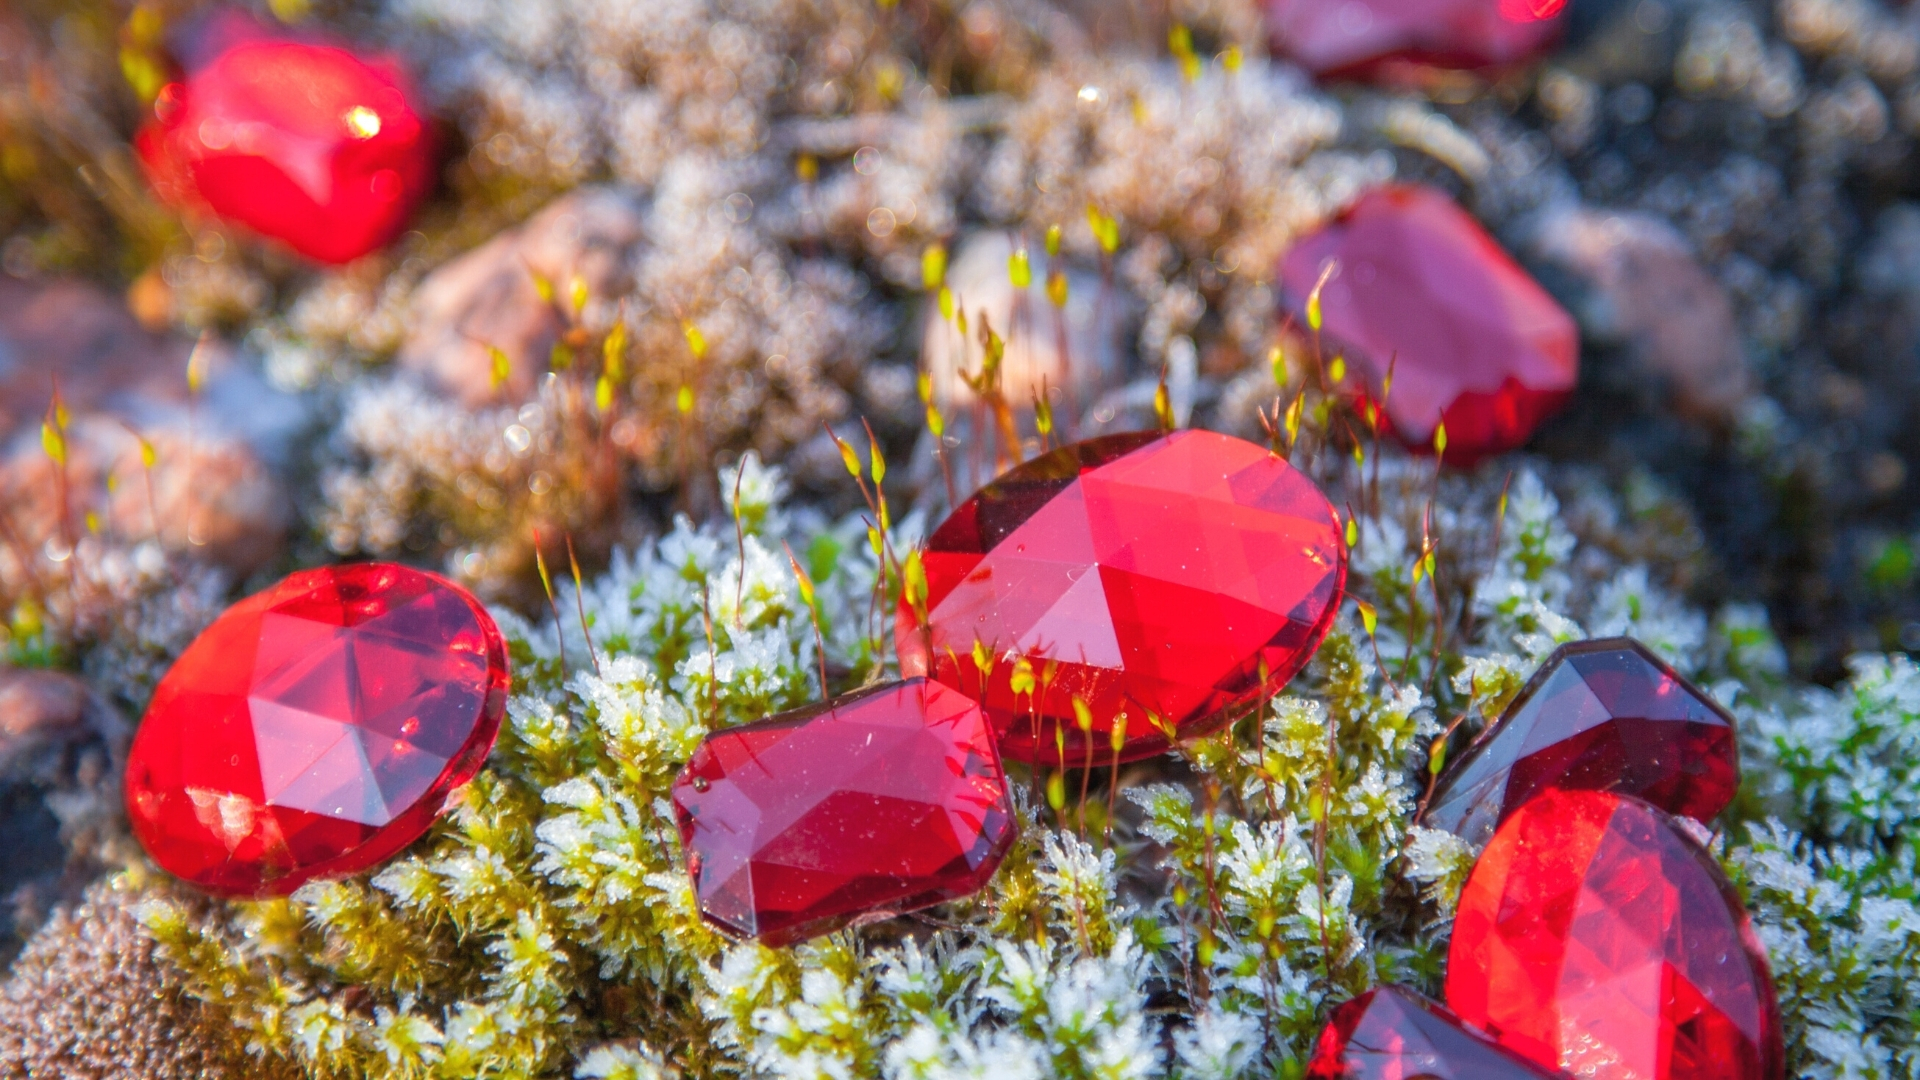 10 fascinating gemstone facts about the 5 cardinal gemstones: emerald, amethyst, diamond, sapphire and ruby - The Fashion Fabrique